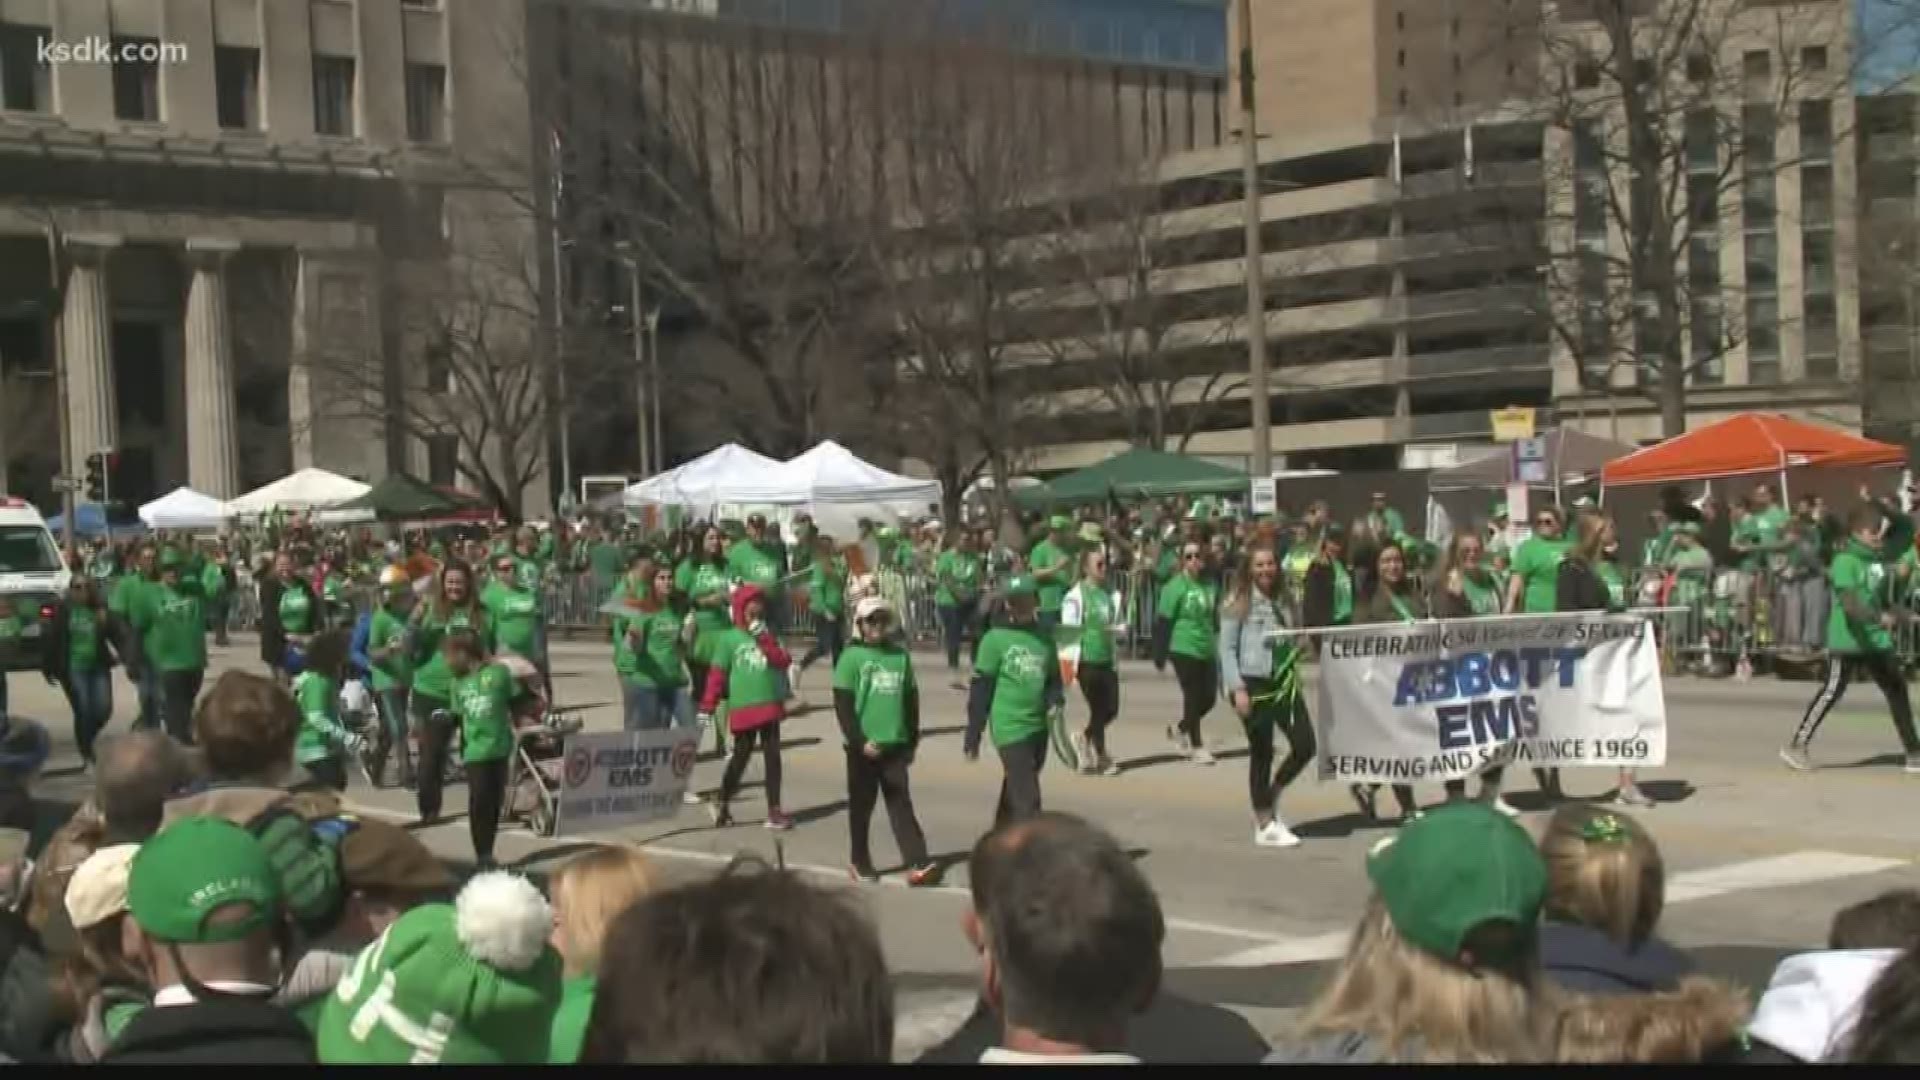 Several St. Louis events have been affected, including St. Patrick's Day parades and sporting events.